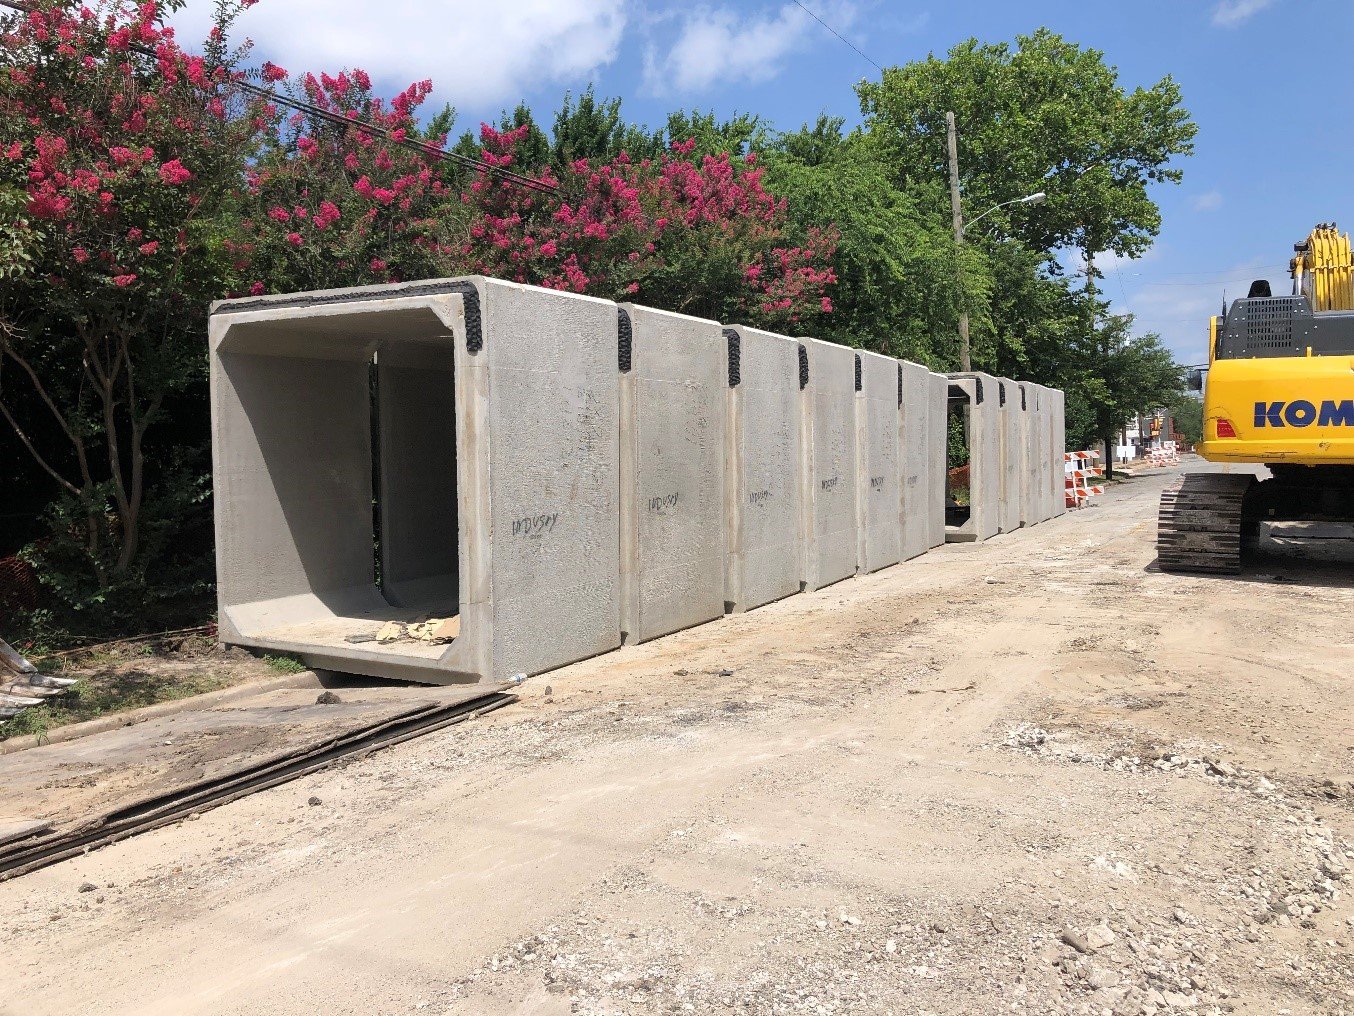 June 2021 - 9'X9' RCBs staged on N Carroll Avenue for installation